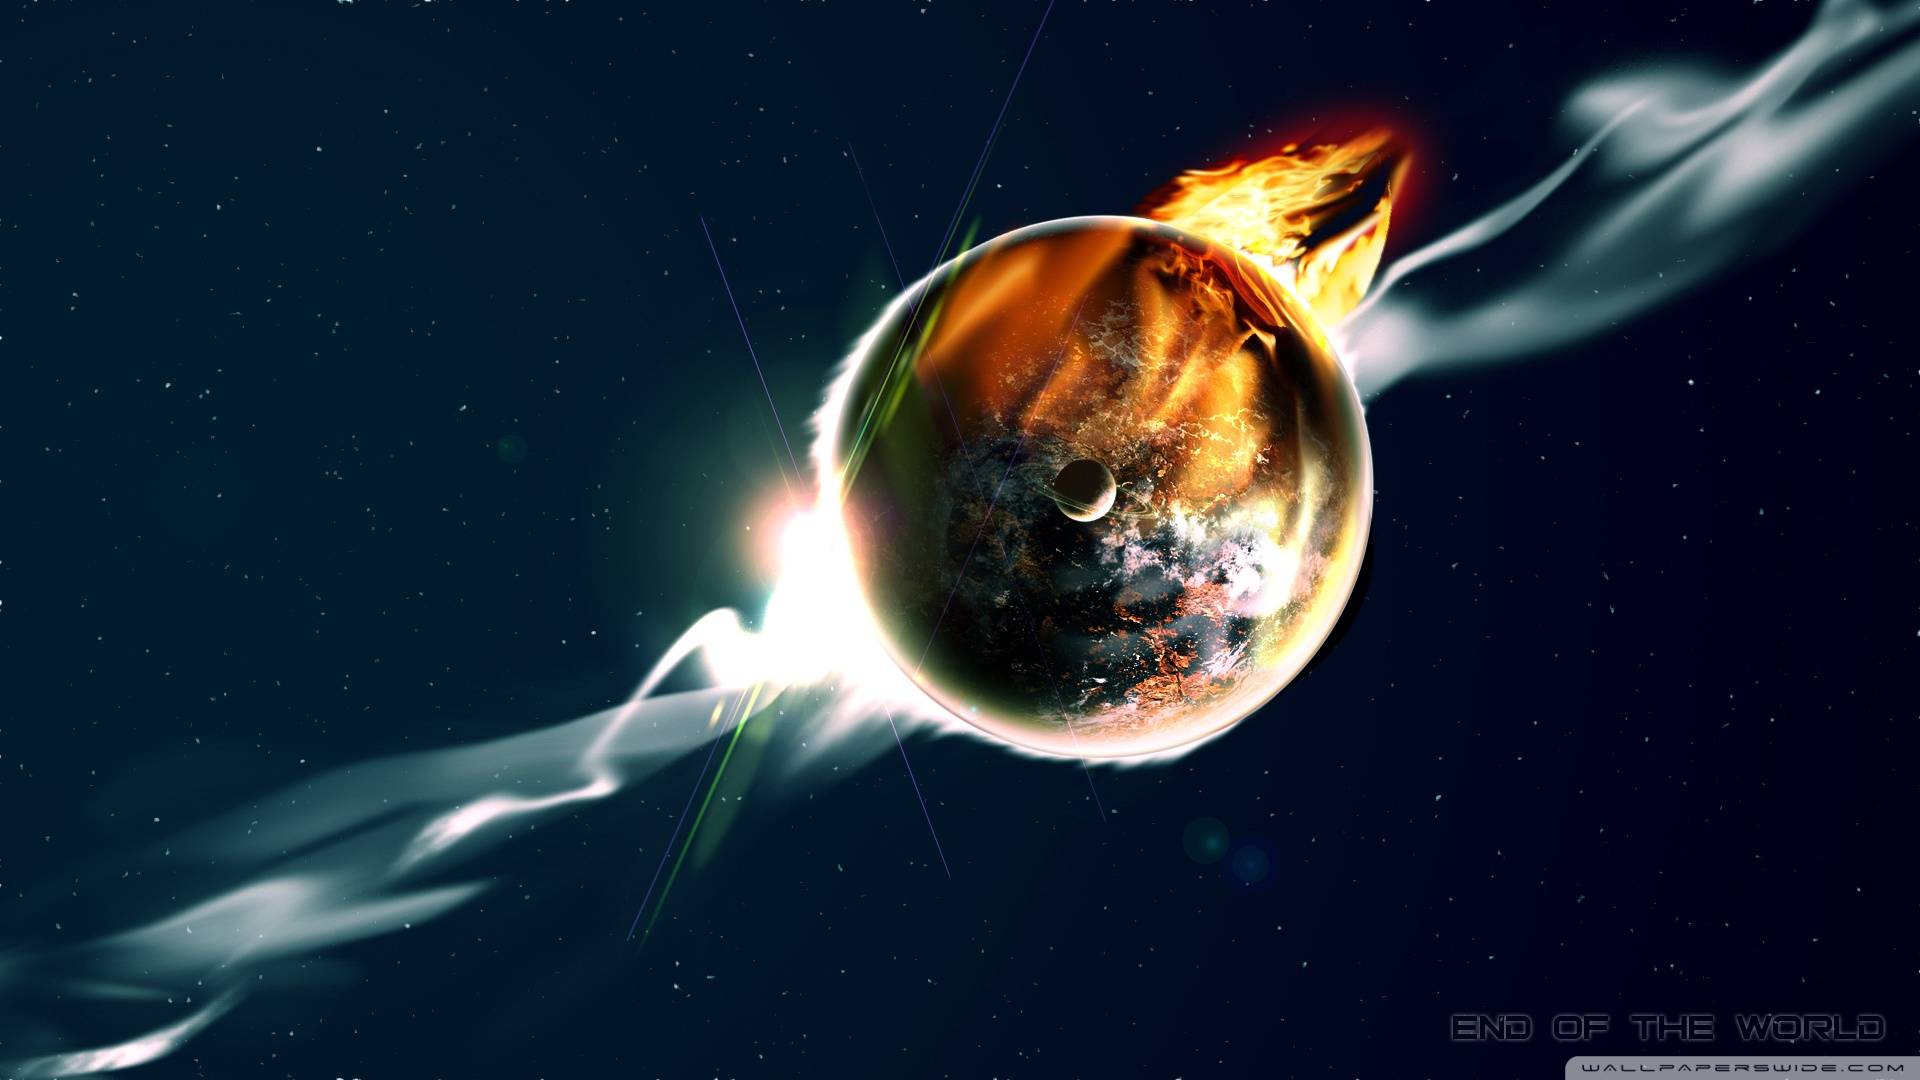 Earth is Destroyed, A wallpaper of a planet being destroyedPeople 1521 - Destruction Of The Earth Wallpaper